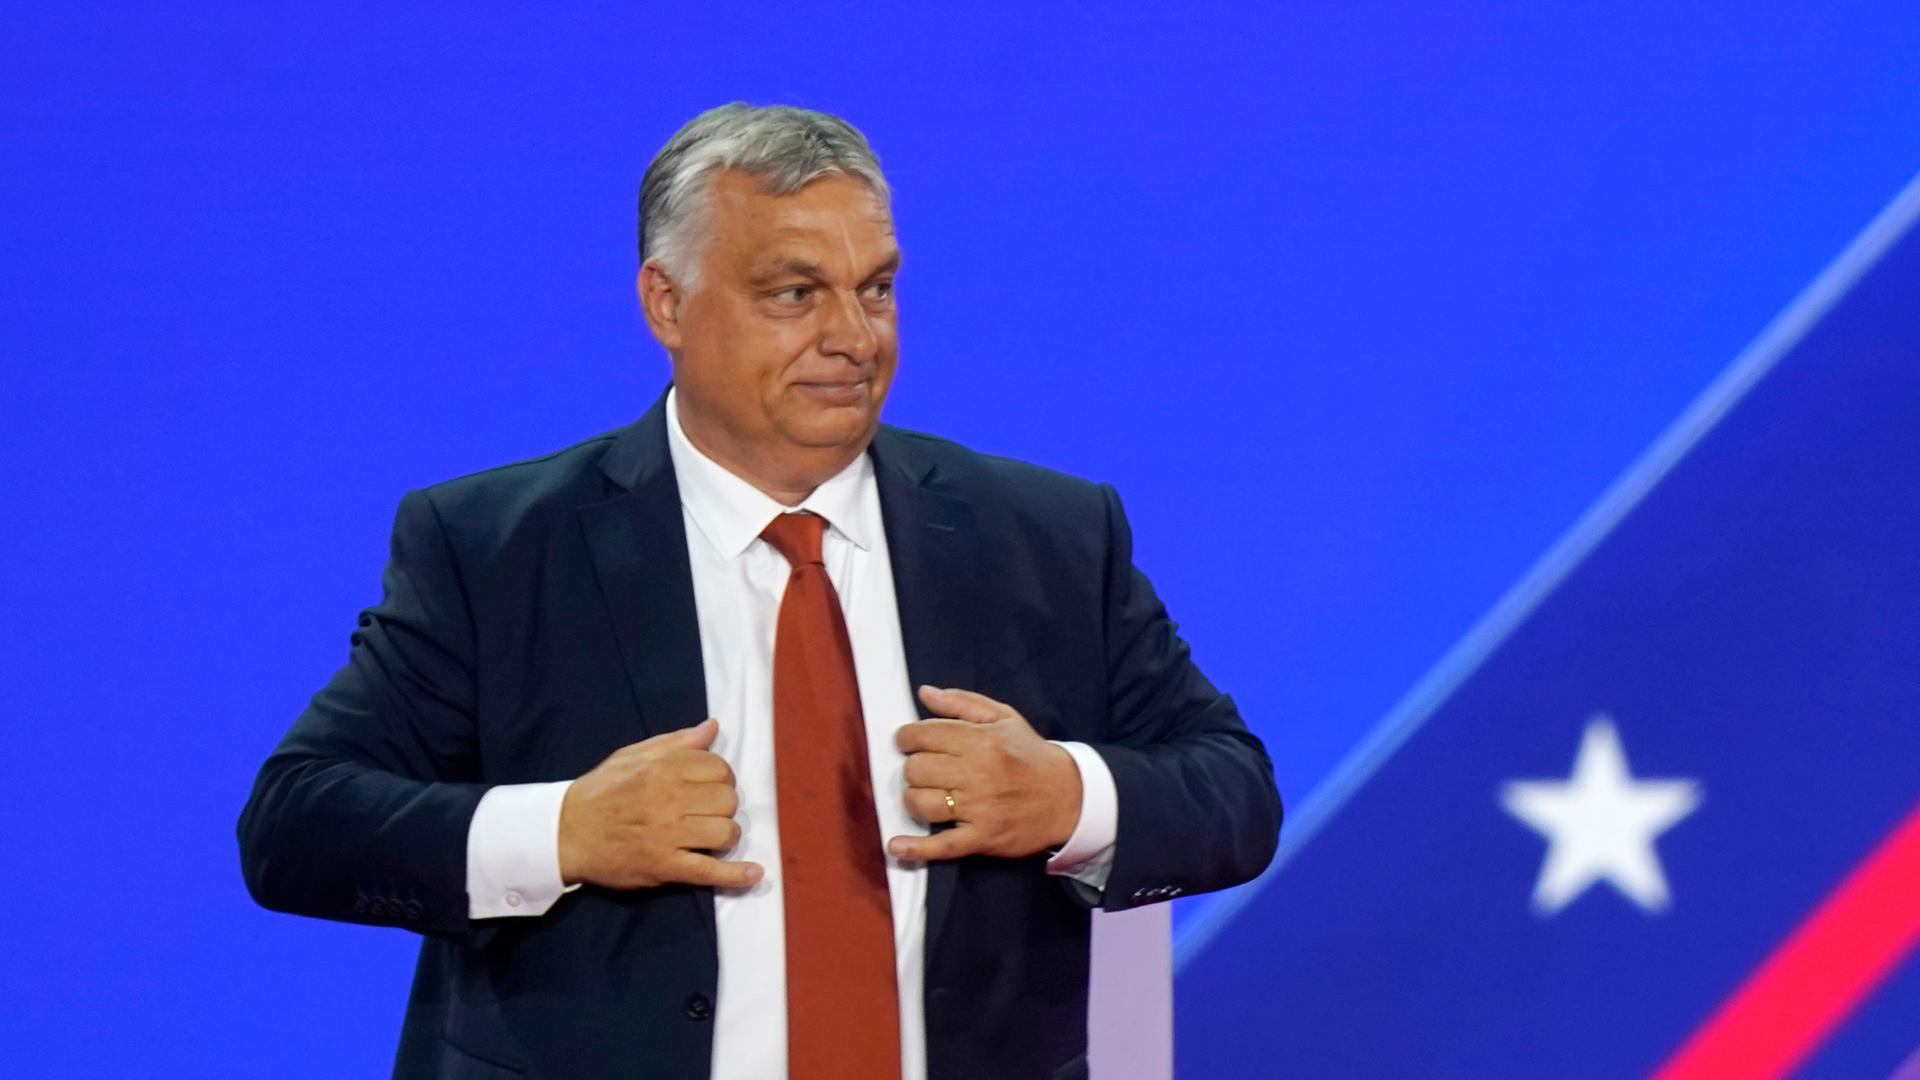 Hungarian Prime Minister Viktor Orban adjusts his jacket after speaking at the Conservative Political Action Conference (CPAC) in Dallas, Thursday, Aug. 4, 2022. (AP Photo/LM Otero)